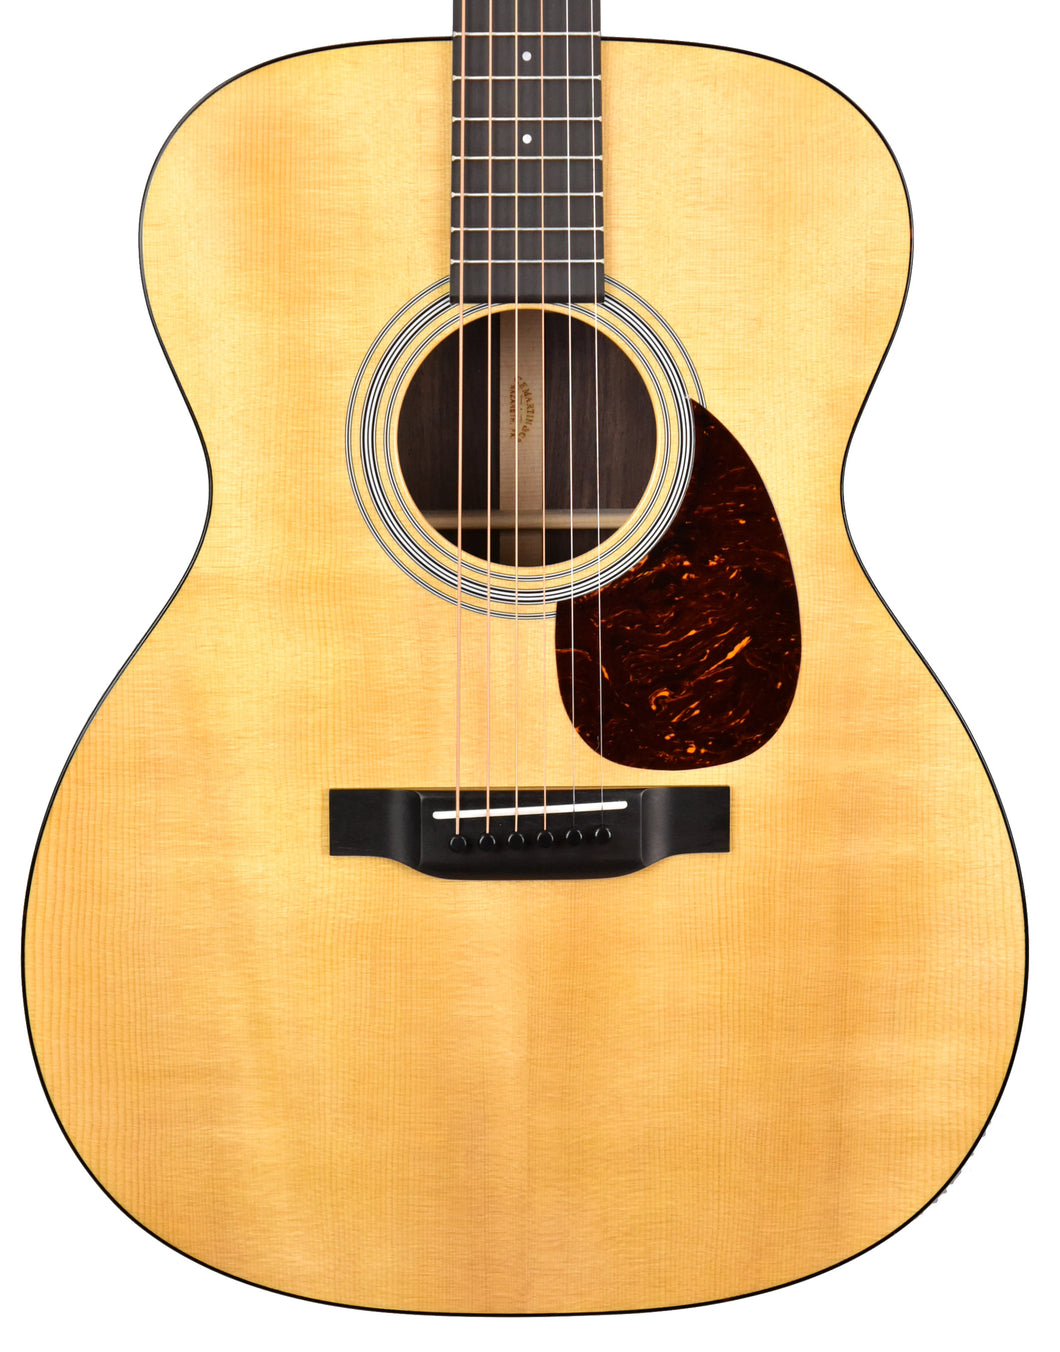 Martin OM-21 Acoustic Guitar in Natural 2442551 - The Music Gallery